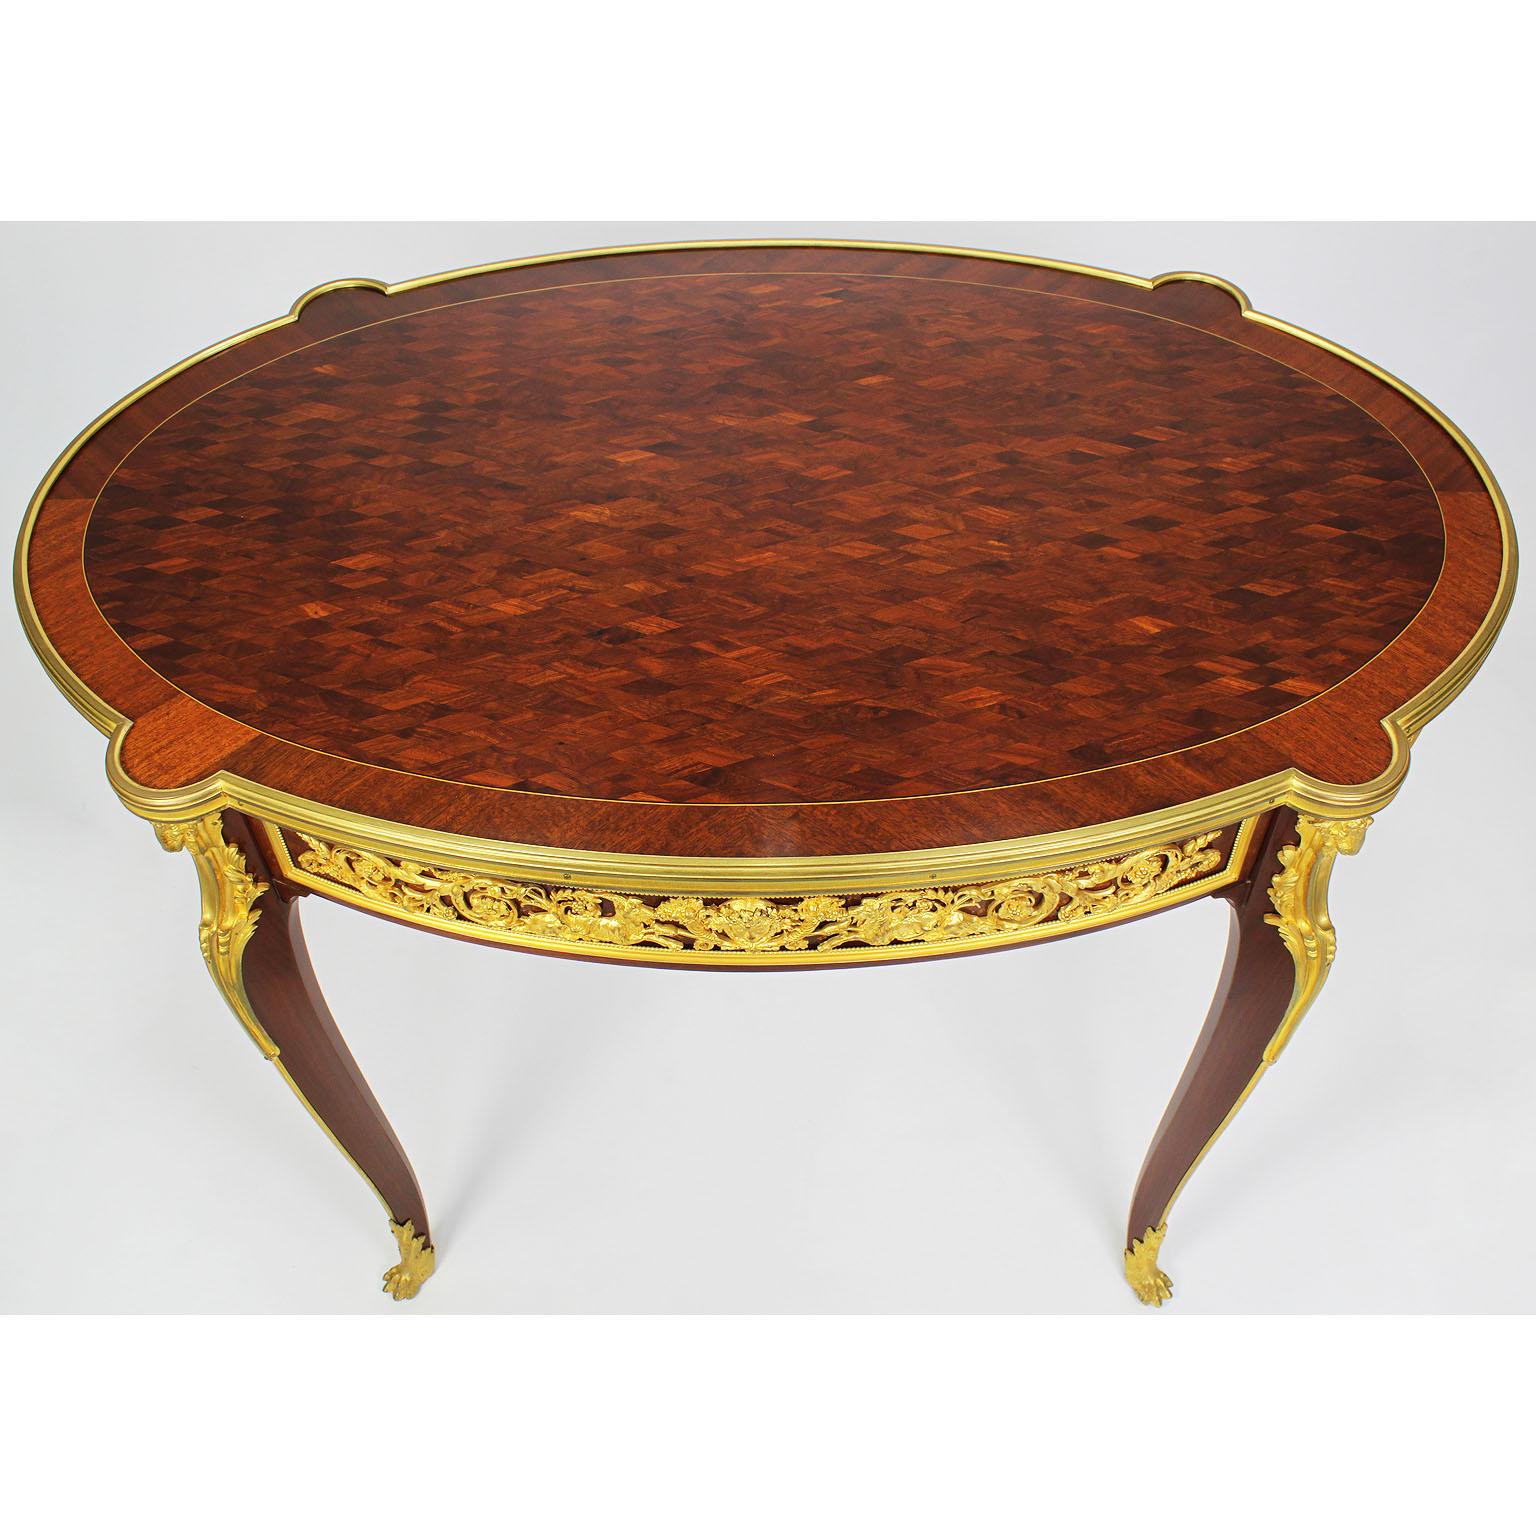 Walnut 19th-20th Century Louis XV Gilt Bronze-Mounted Table, Francois Linke Attributed For Sale